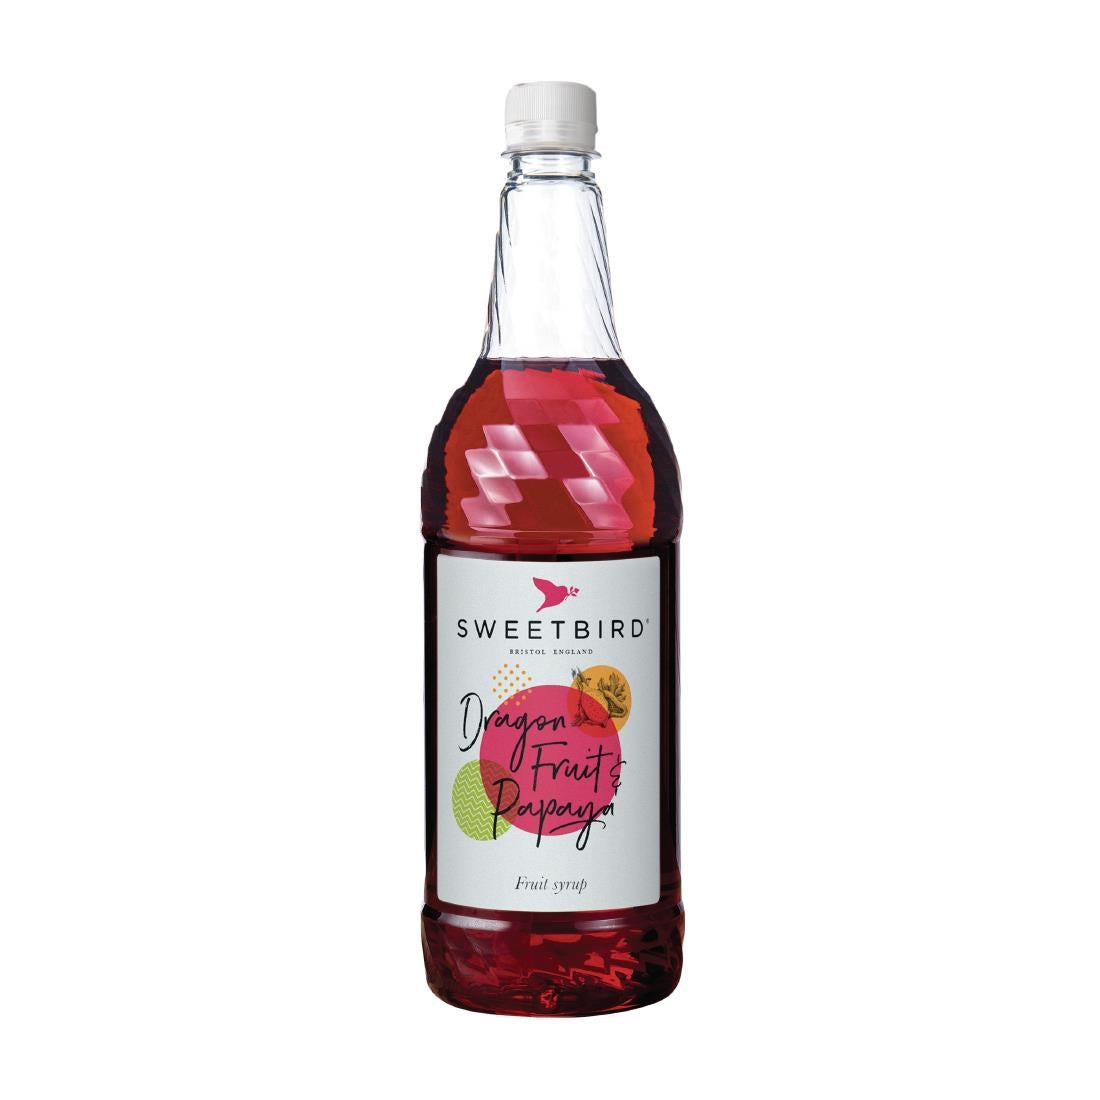 GP393 Sweetbird Dragonfruit and Papaya Syrup 1Ltr Bottle